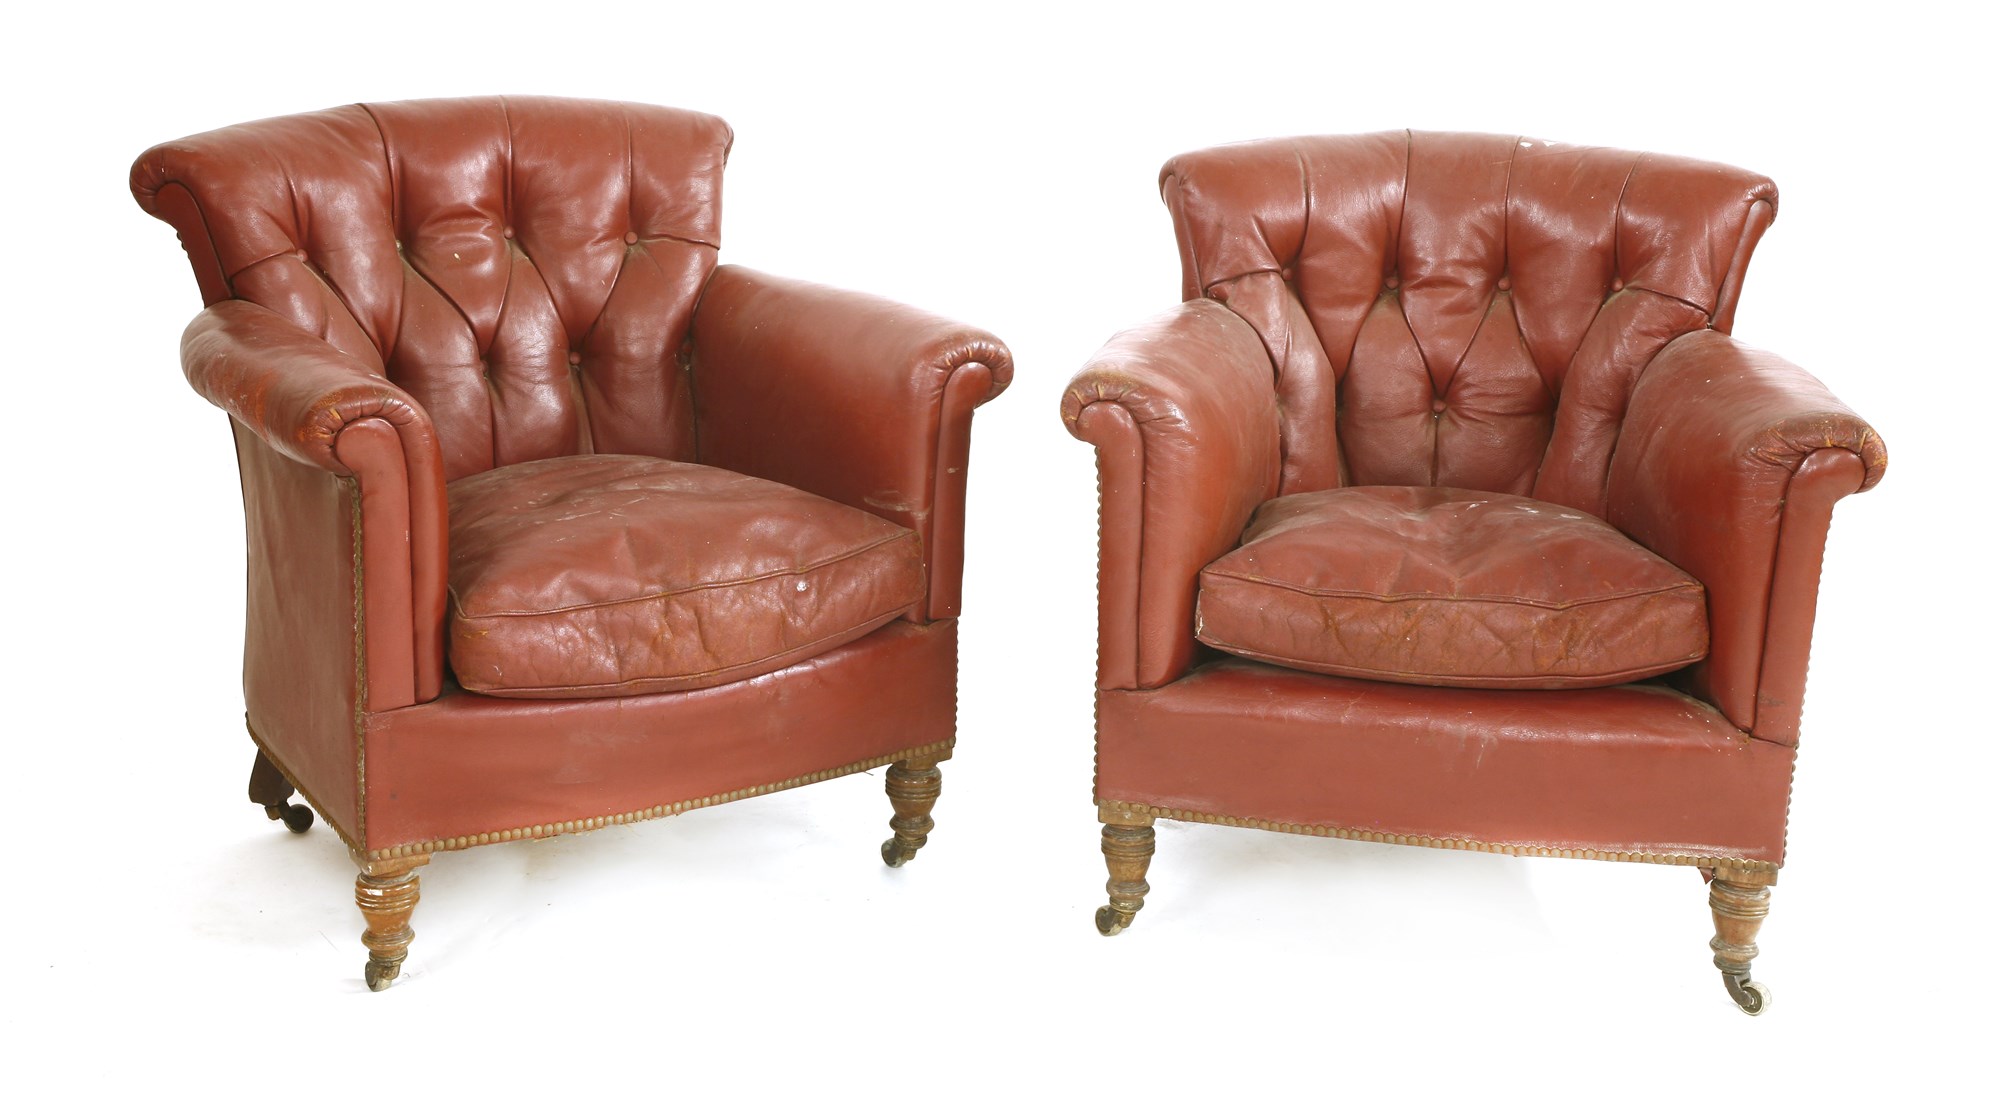 Sir Rod Stewart's Red Leather Armchairs at Sworders Fine Art